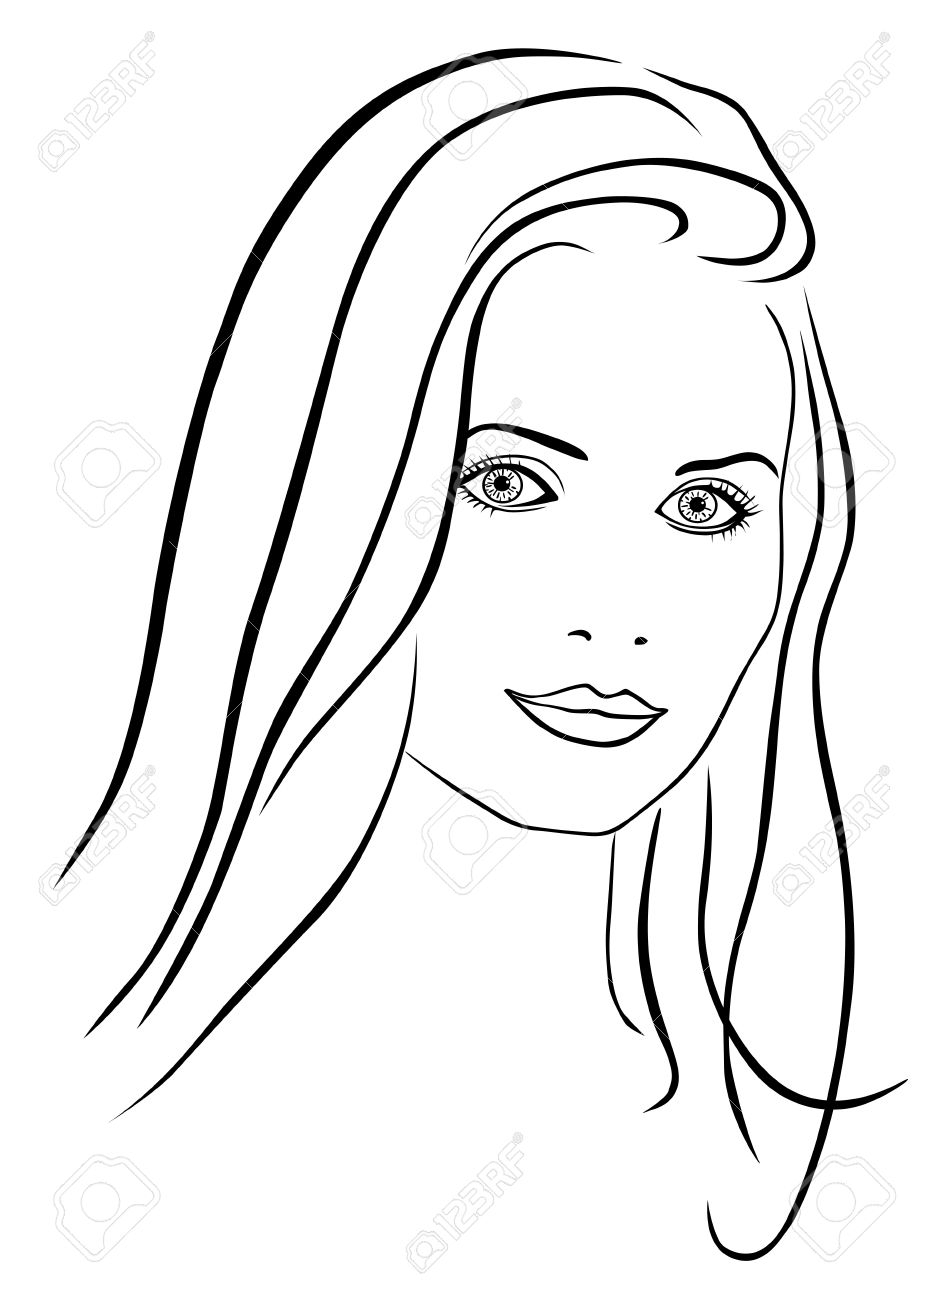 Woman Face Line Drawing at GetDrawings.com | Free for personal use